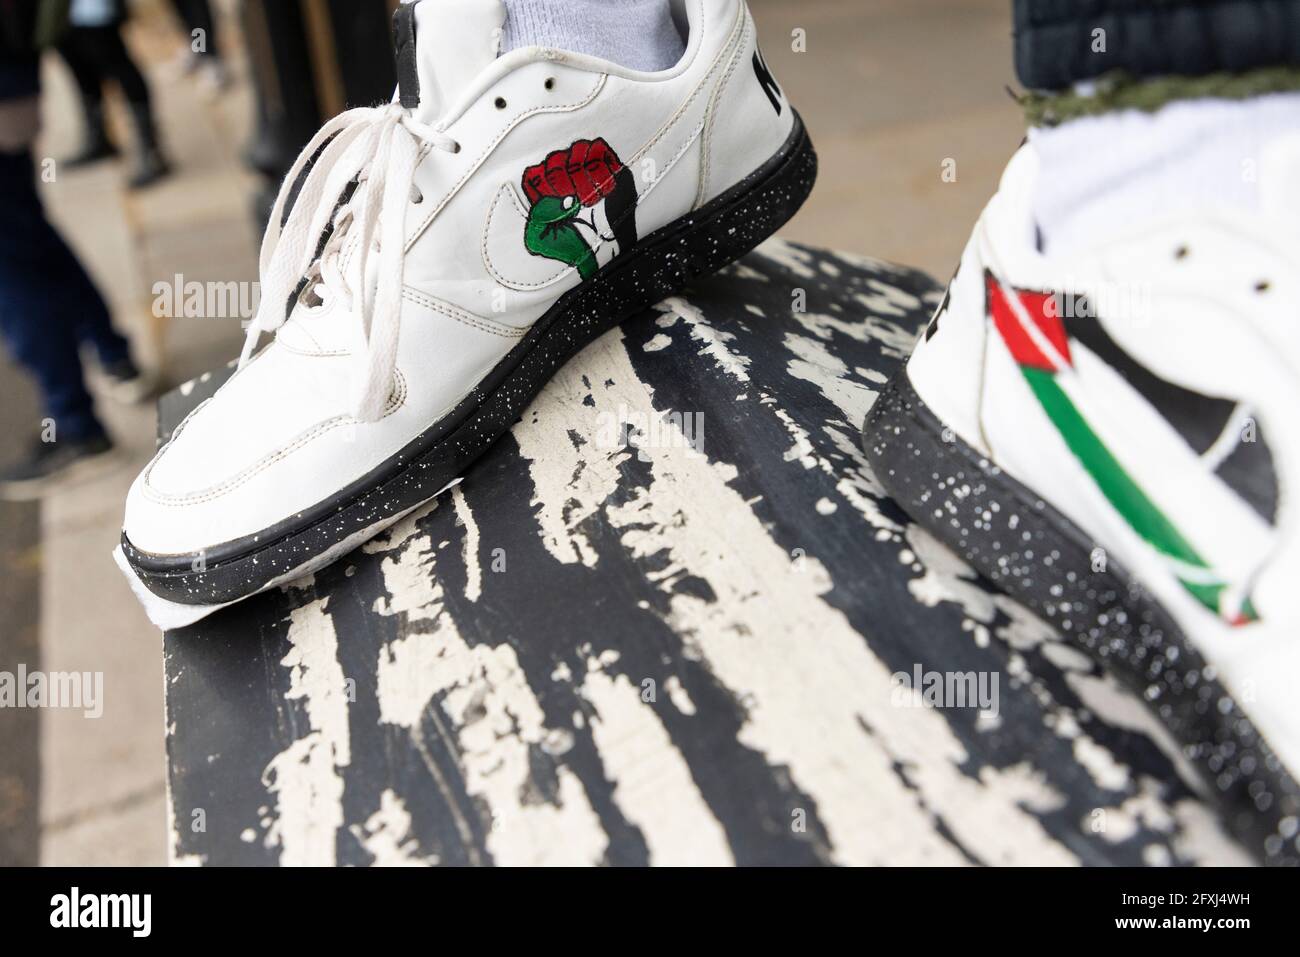 Detail of protesters shoes showing Palestinian motifs, Free Palestine Protest, London, 22 May 2021 Stock Photo